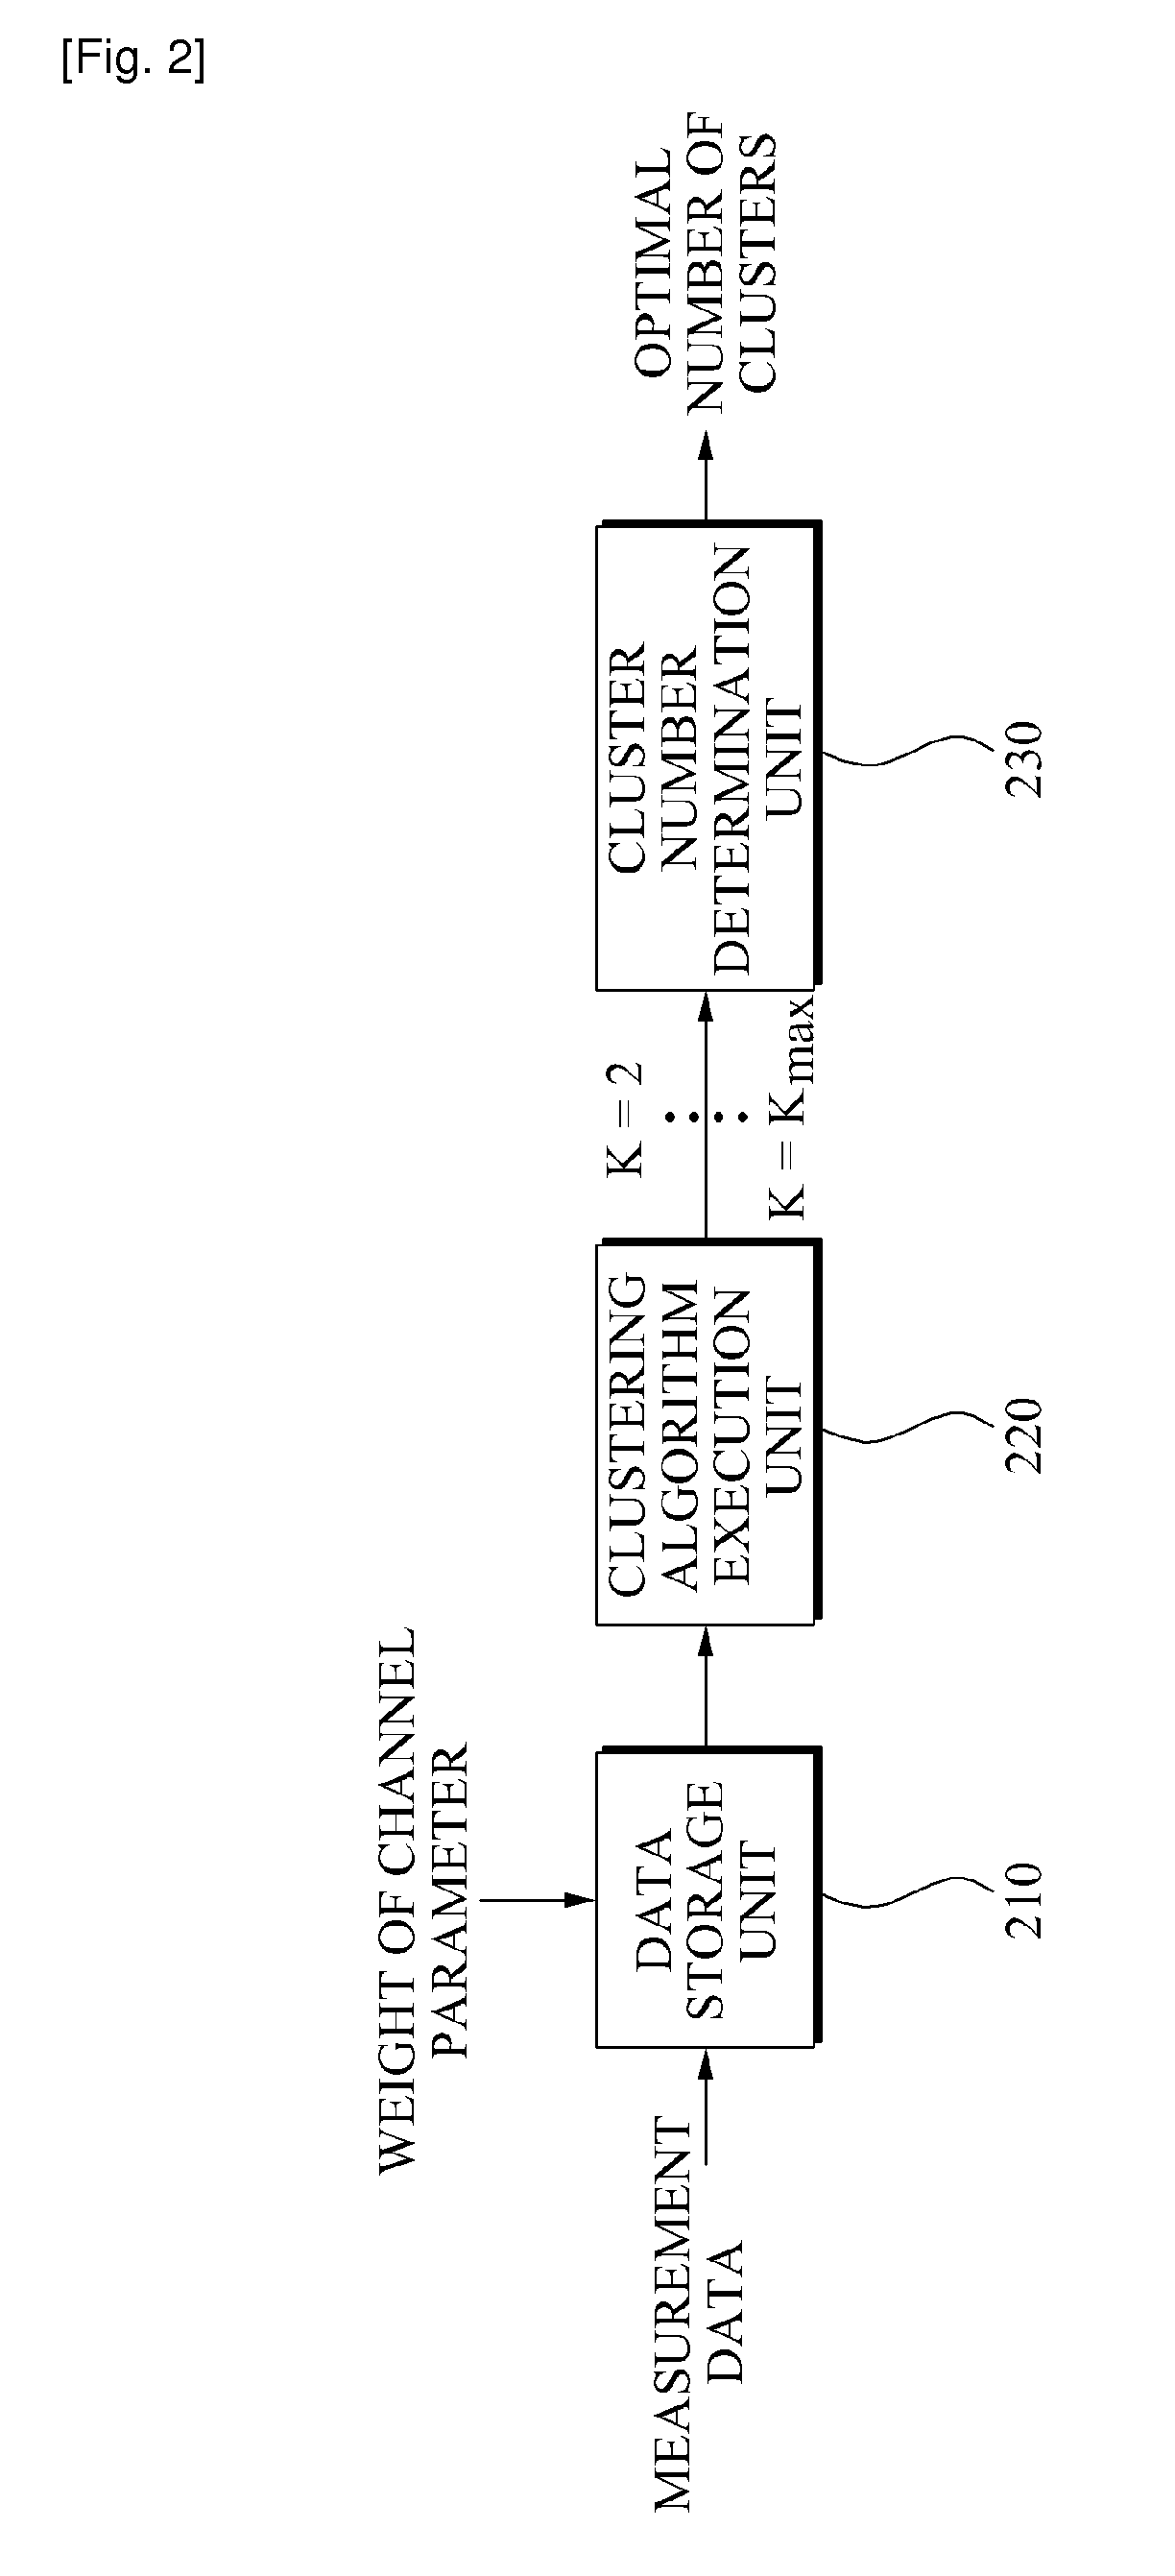 Method for automatic clustering and method and apparatus for multipath clustering in wireless communication using the same